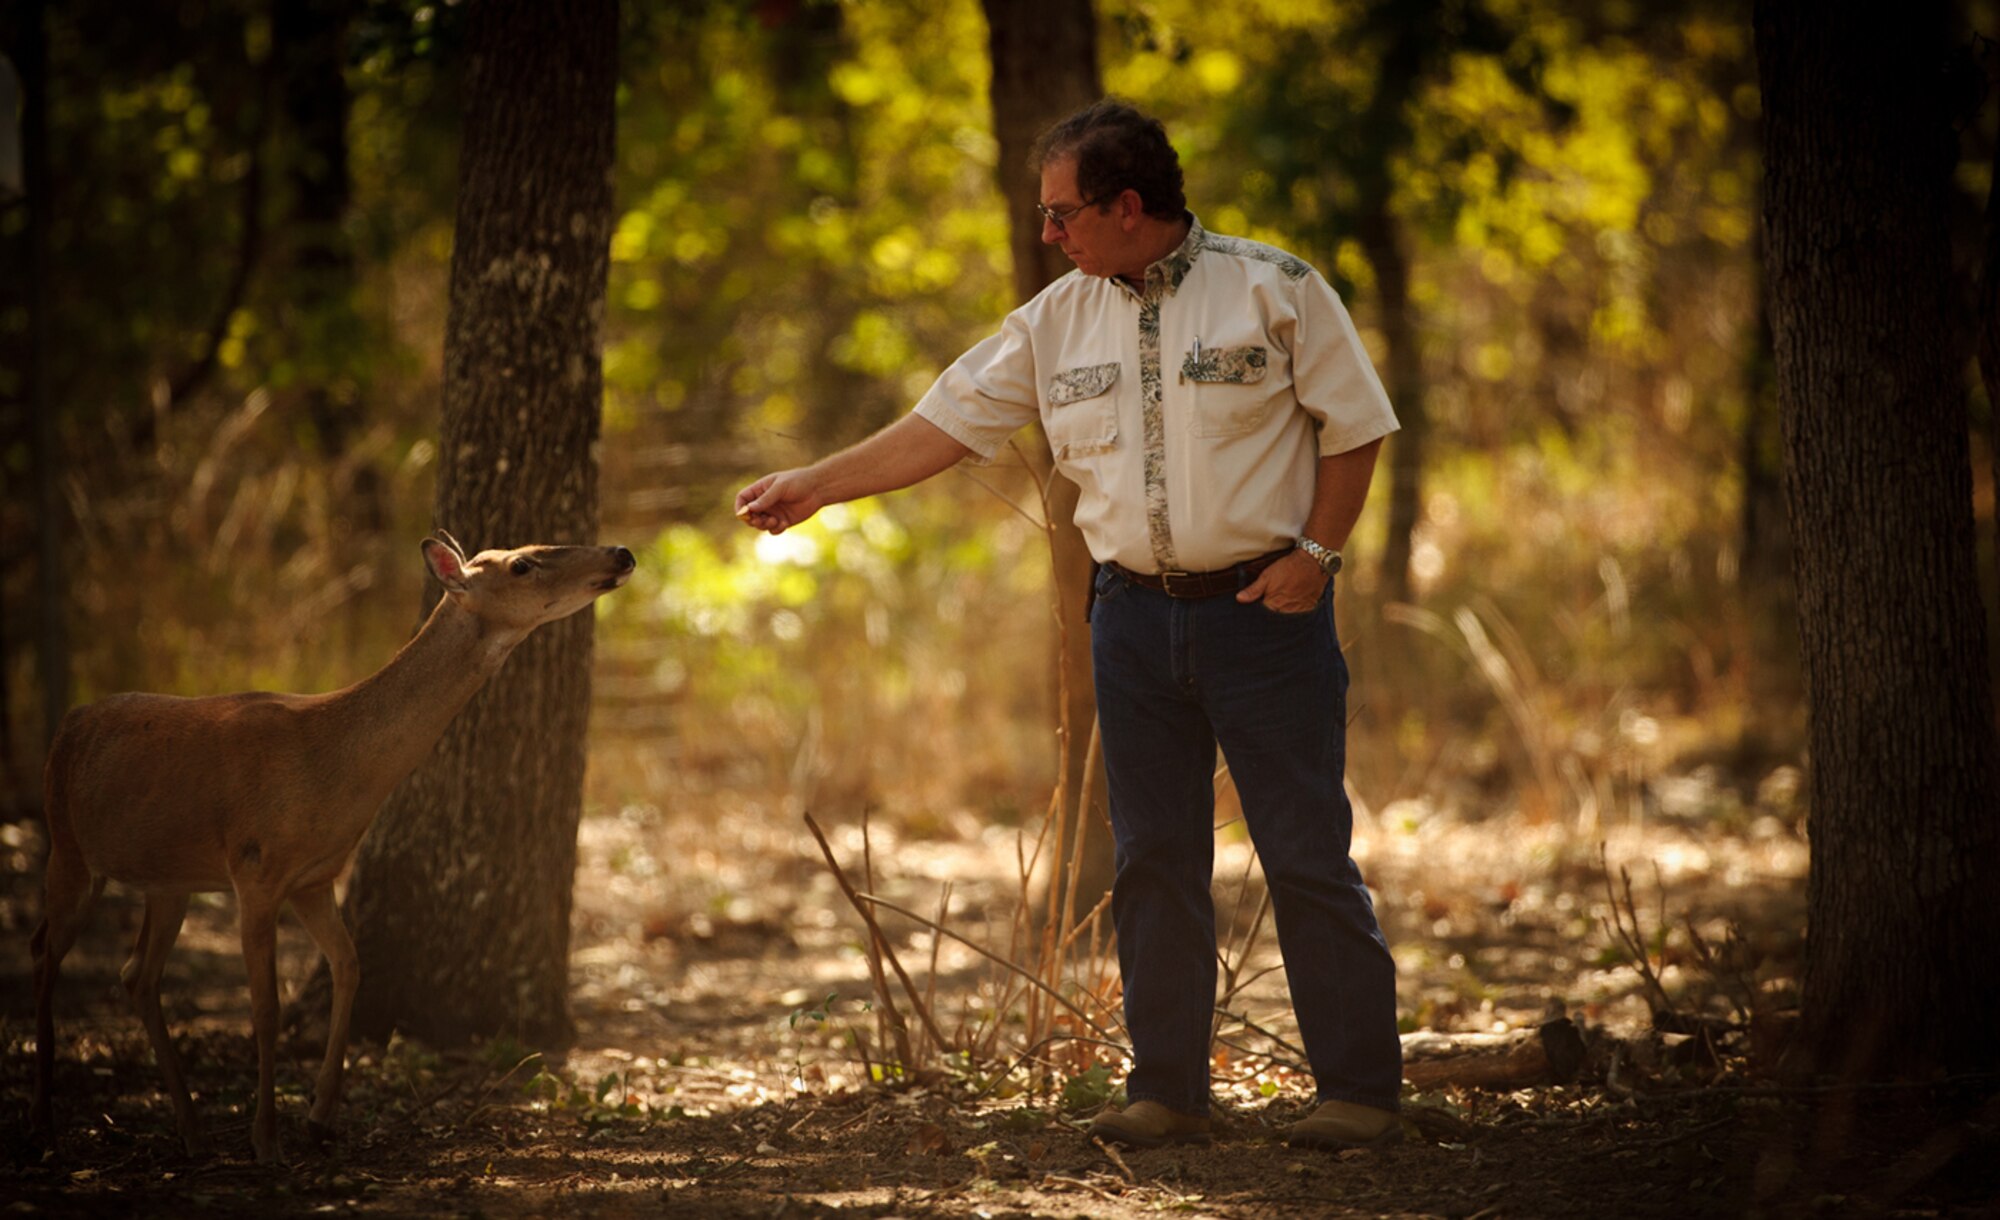 HEAD HUNTER - At his 11-acre ranch in Seguin, Texas, Hahn feeds one of the 13 whitetail deer he is raising — partly as a hobby and for future sale. (photo by Tech. Sgt. Samuel Bendet)